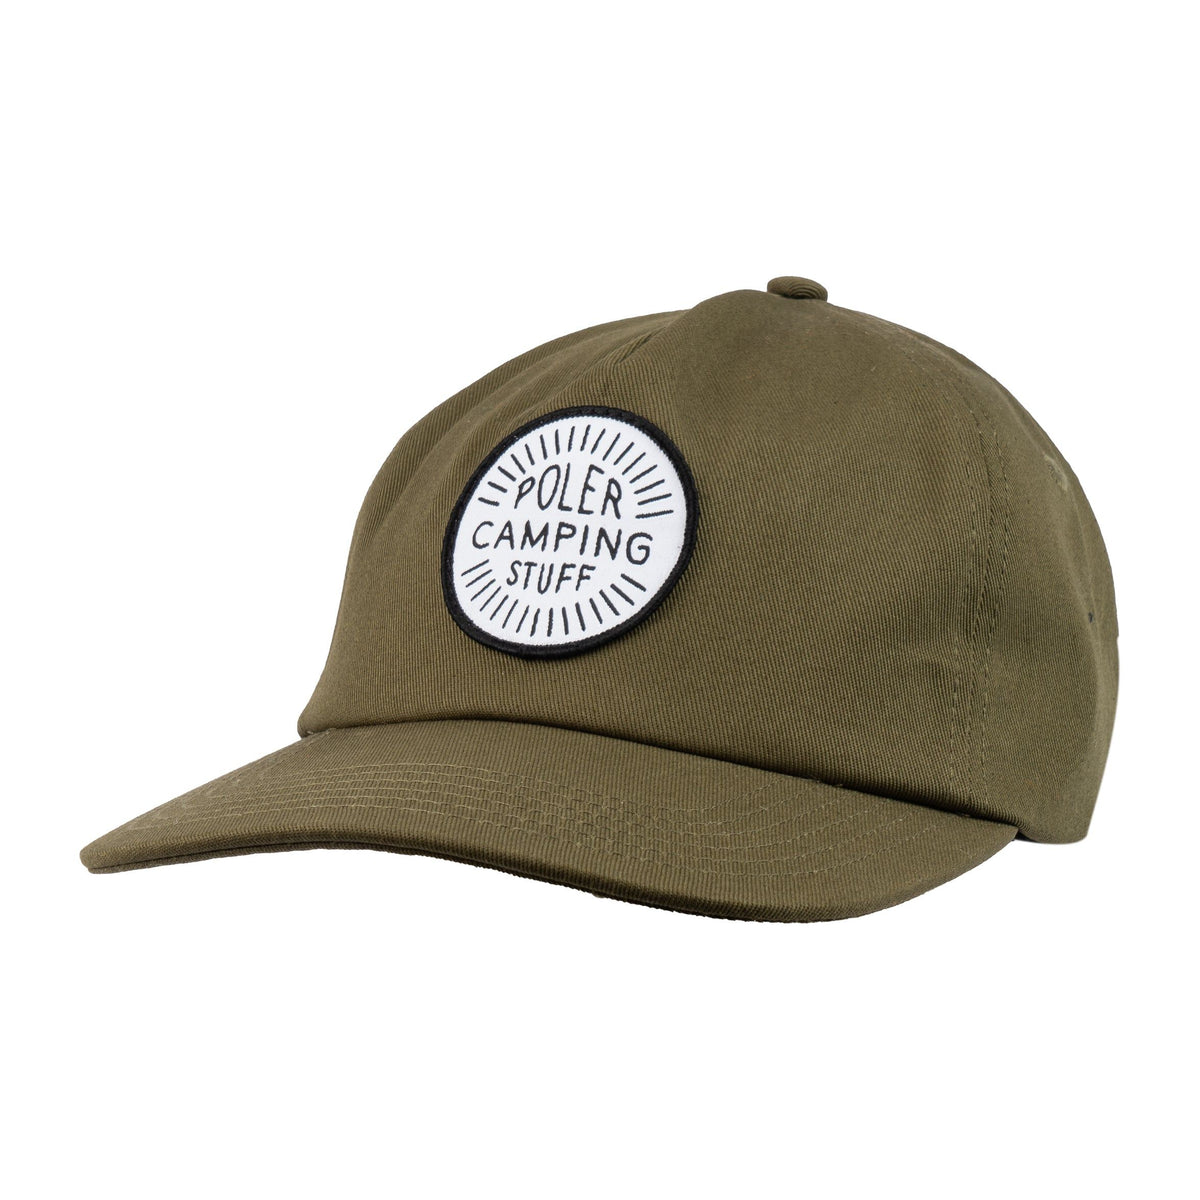 Poler Camping Stuff Patch Hat